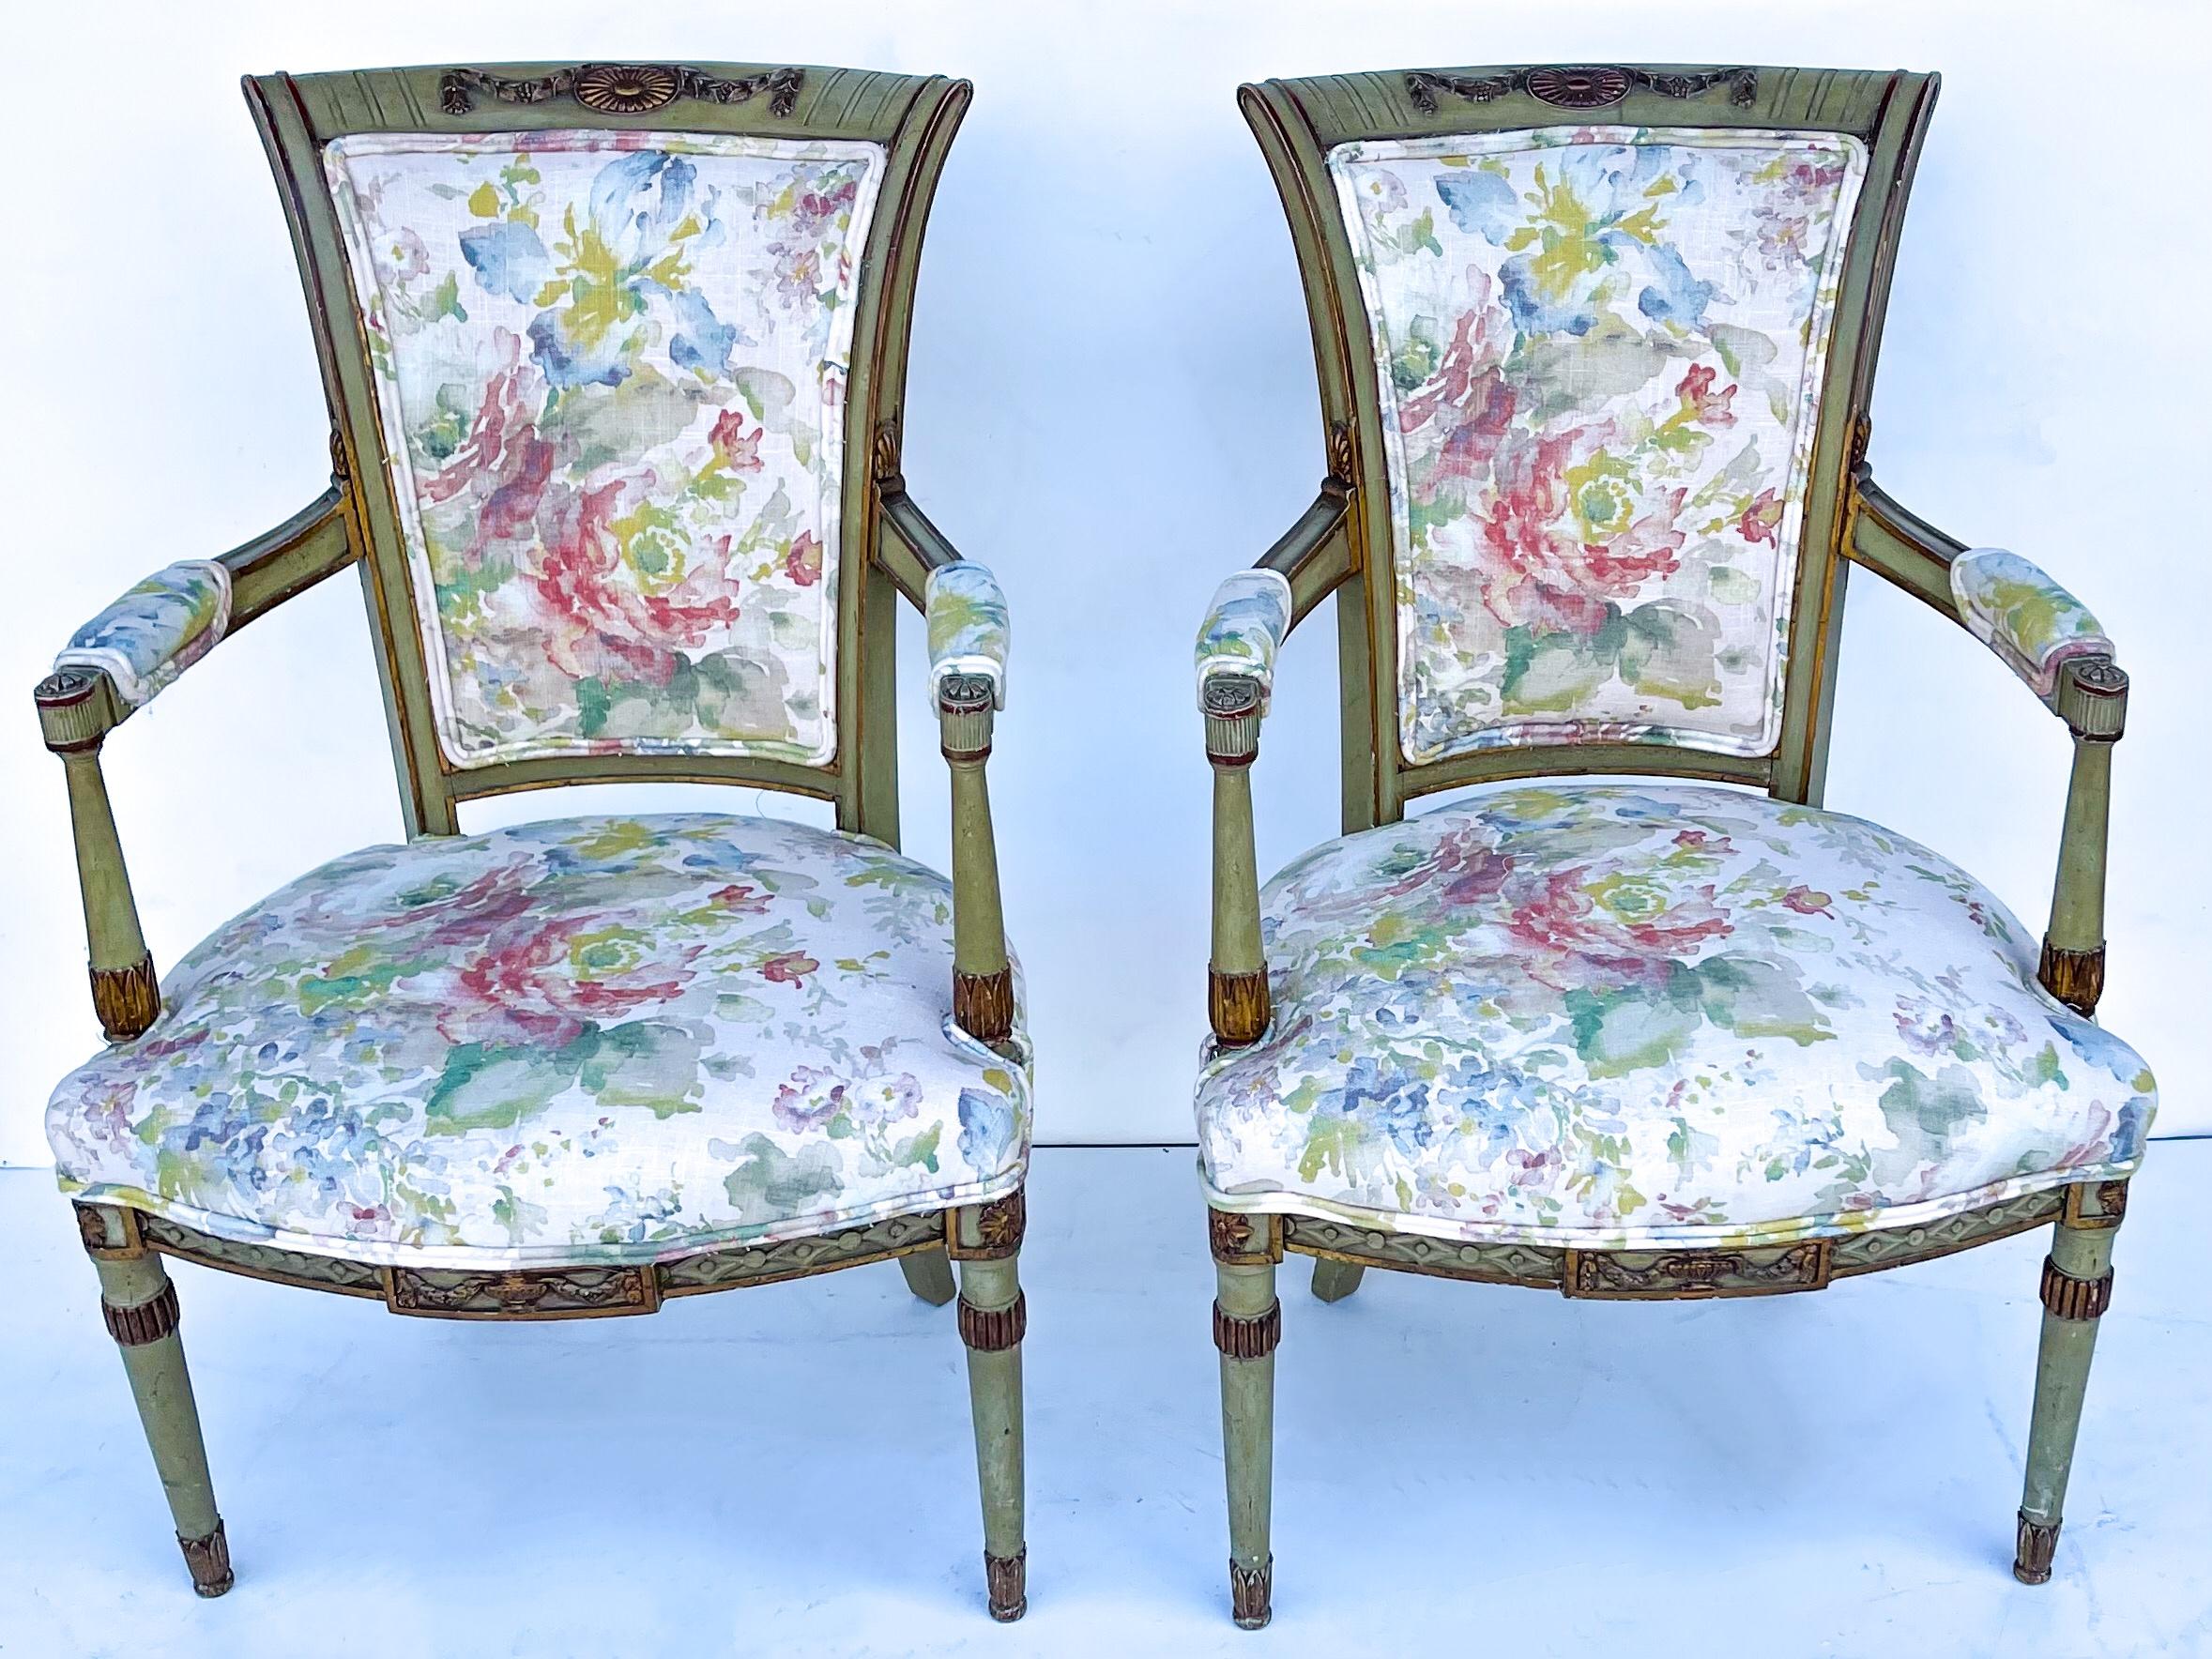 Early 20th C Carved and Painted French Directoire Style Chairs in Linen, Pair In Good Condition For Sale In Kennesaw, GA